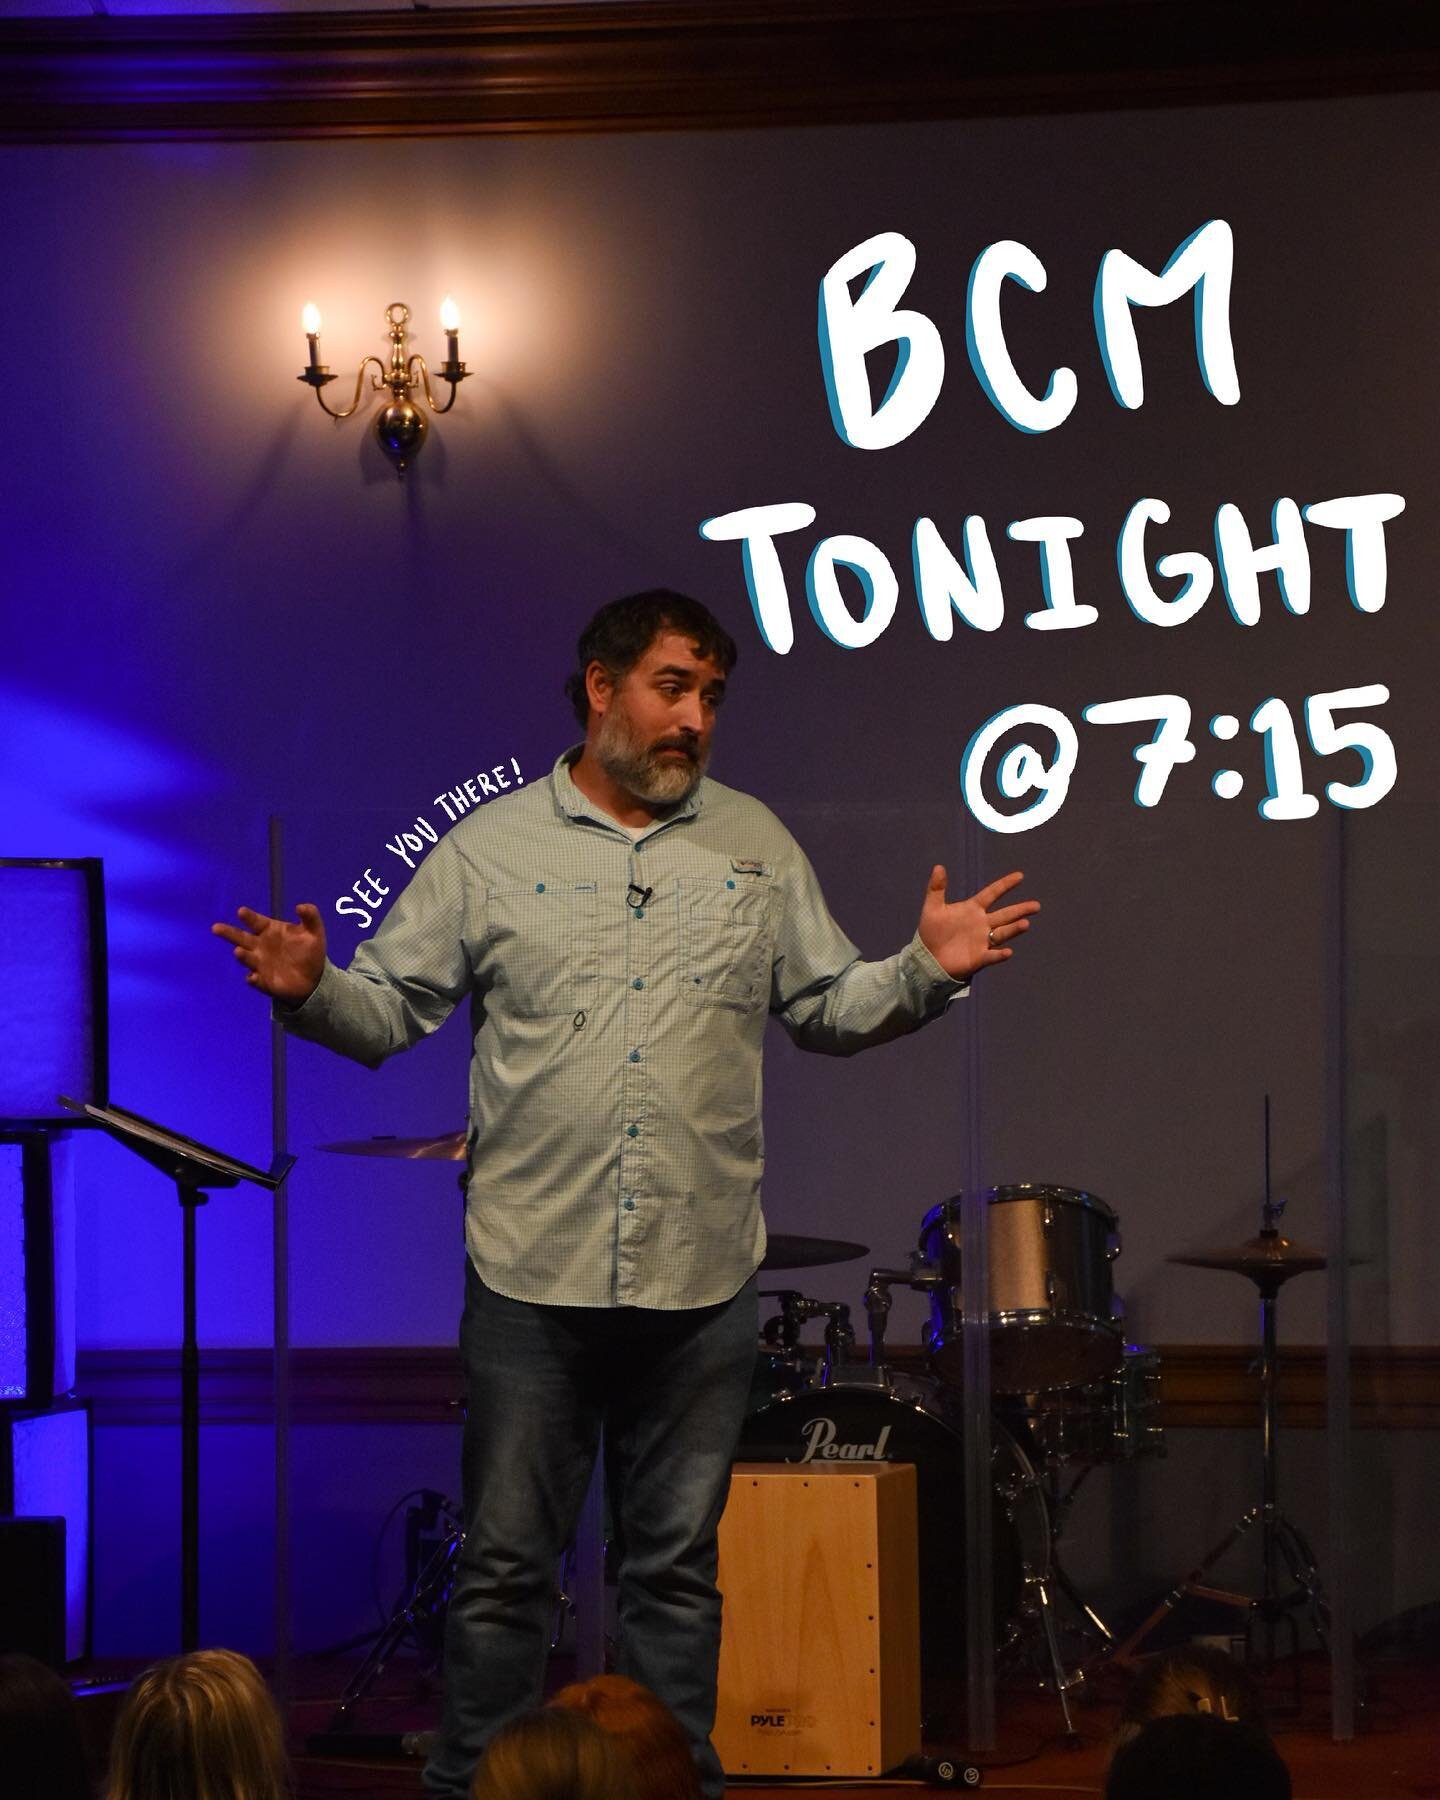 BCM tonight at 7:15! See you there! 

@willpuckettphotography